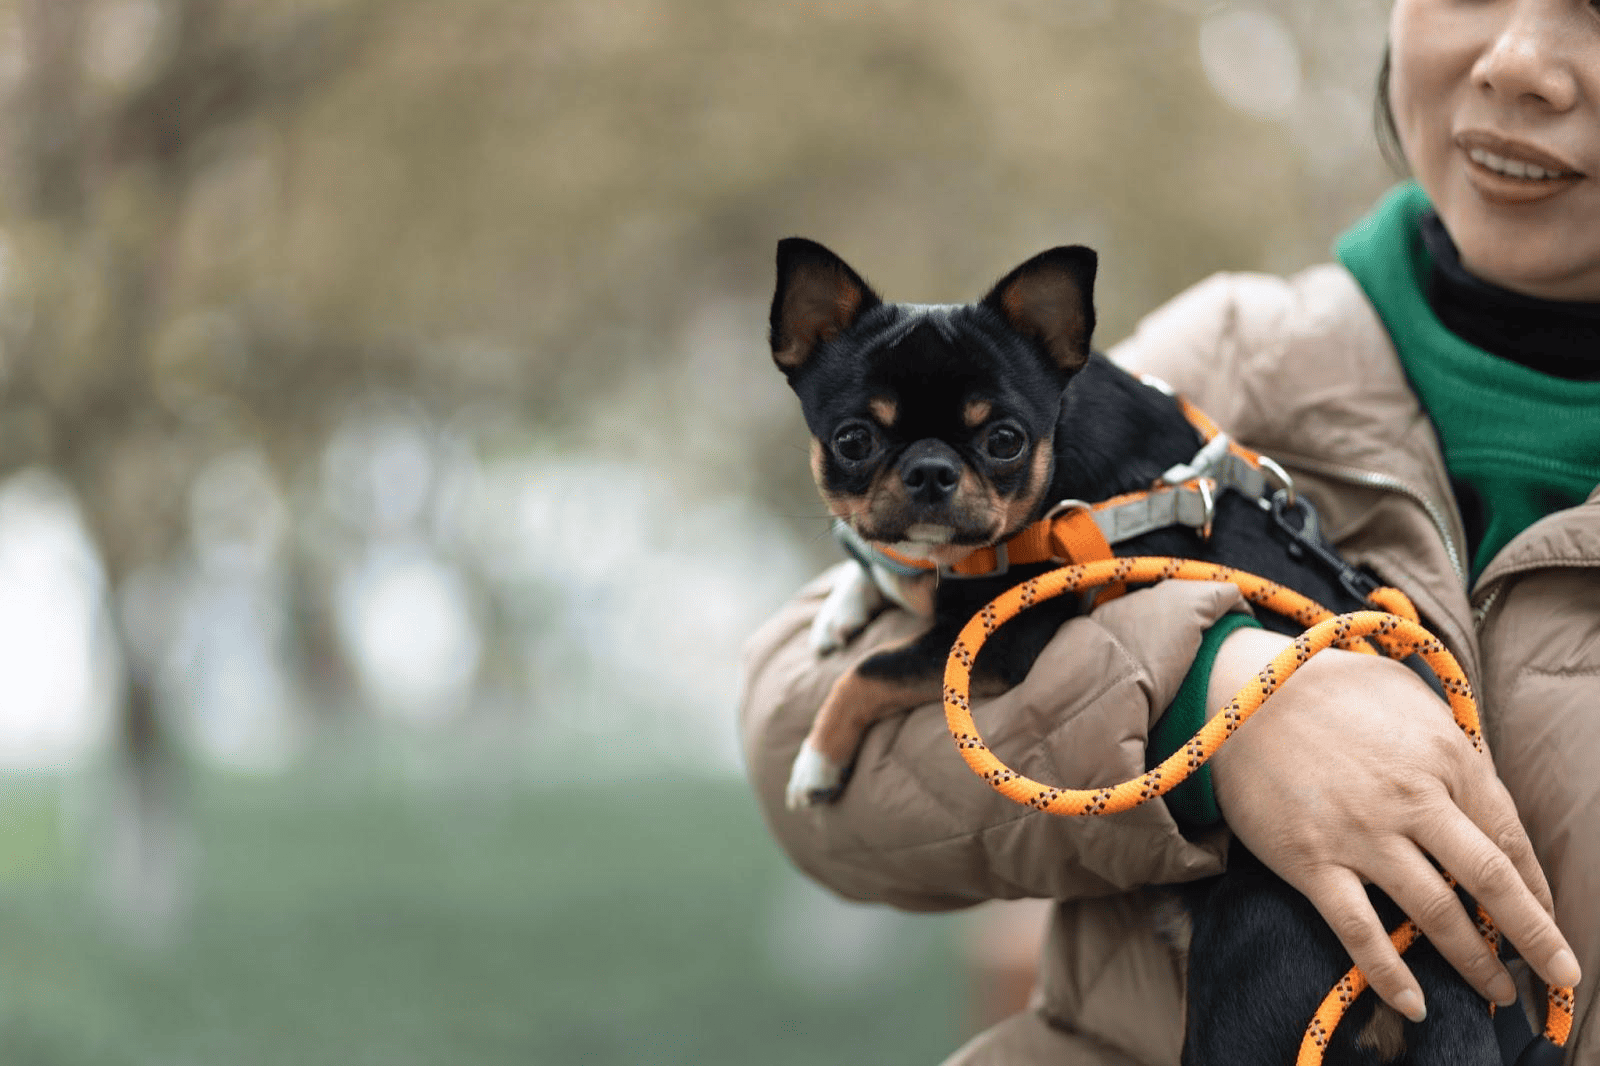 I Want a Dog. Will It Bite? – 12 Dog Breeds That Are Perfect for First-Time Owners